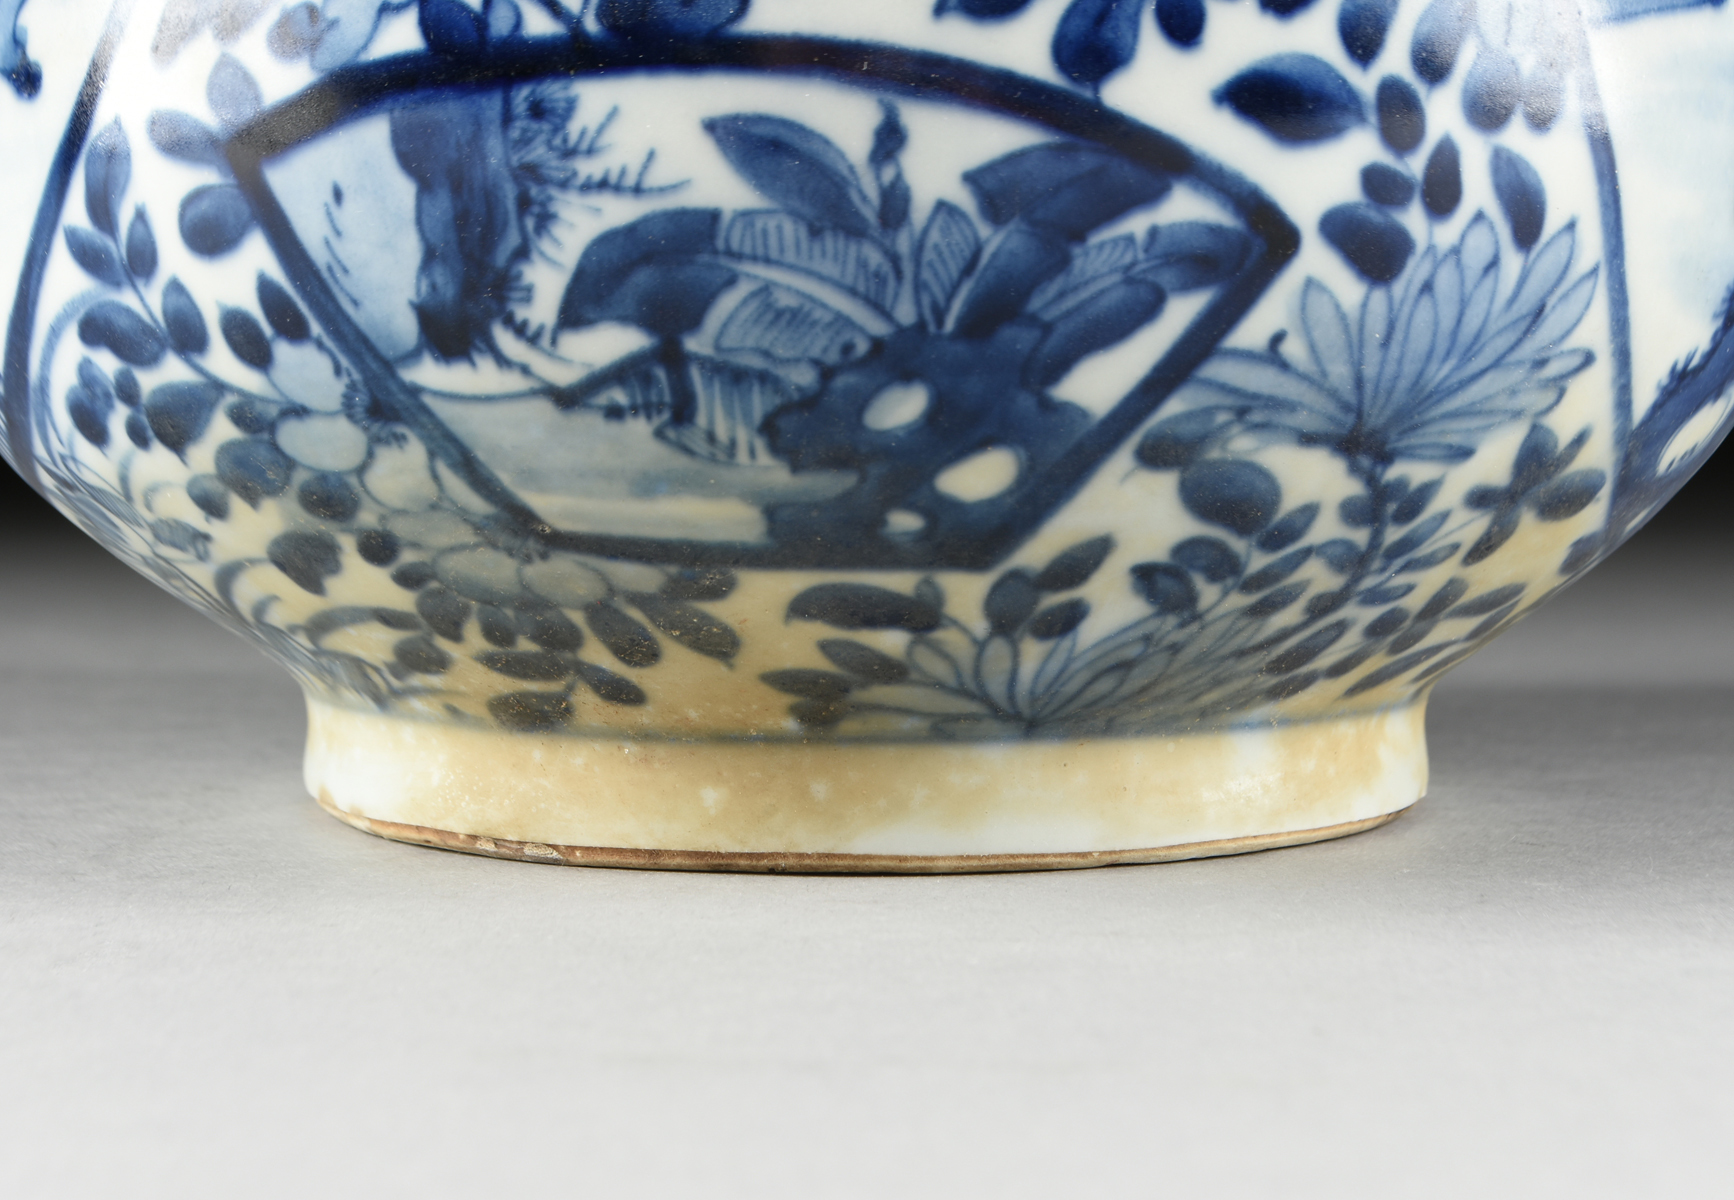 A QING DYNASTY BLUE AND WHITE PORCELAIN BOTTLE VASE, SHIPWRECK ARTIFACT, ATTRIBUTED TO THE KANGXI - Image 4 of 8